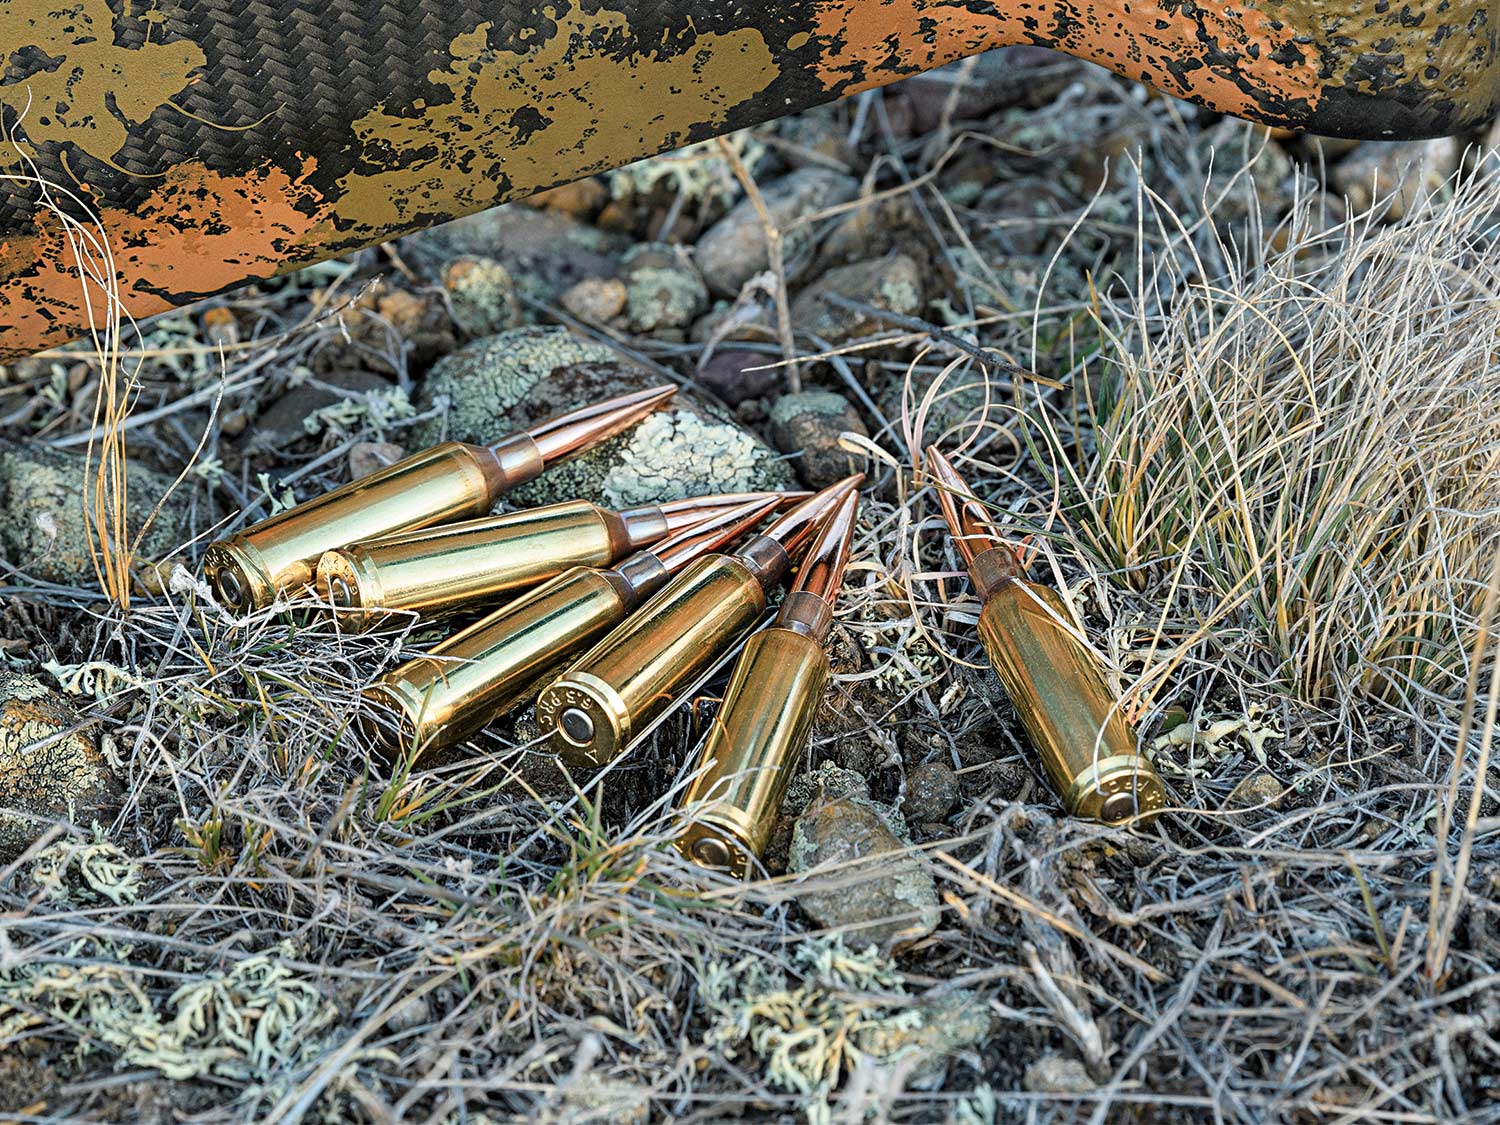 A pile of handloaded ammo on the ground.